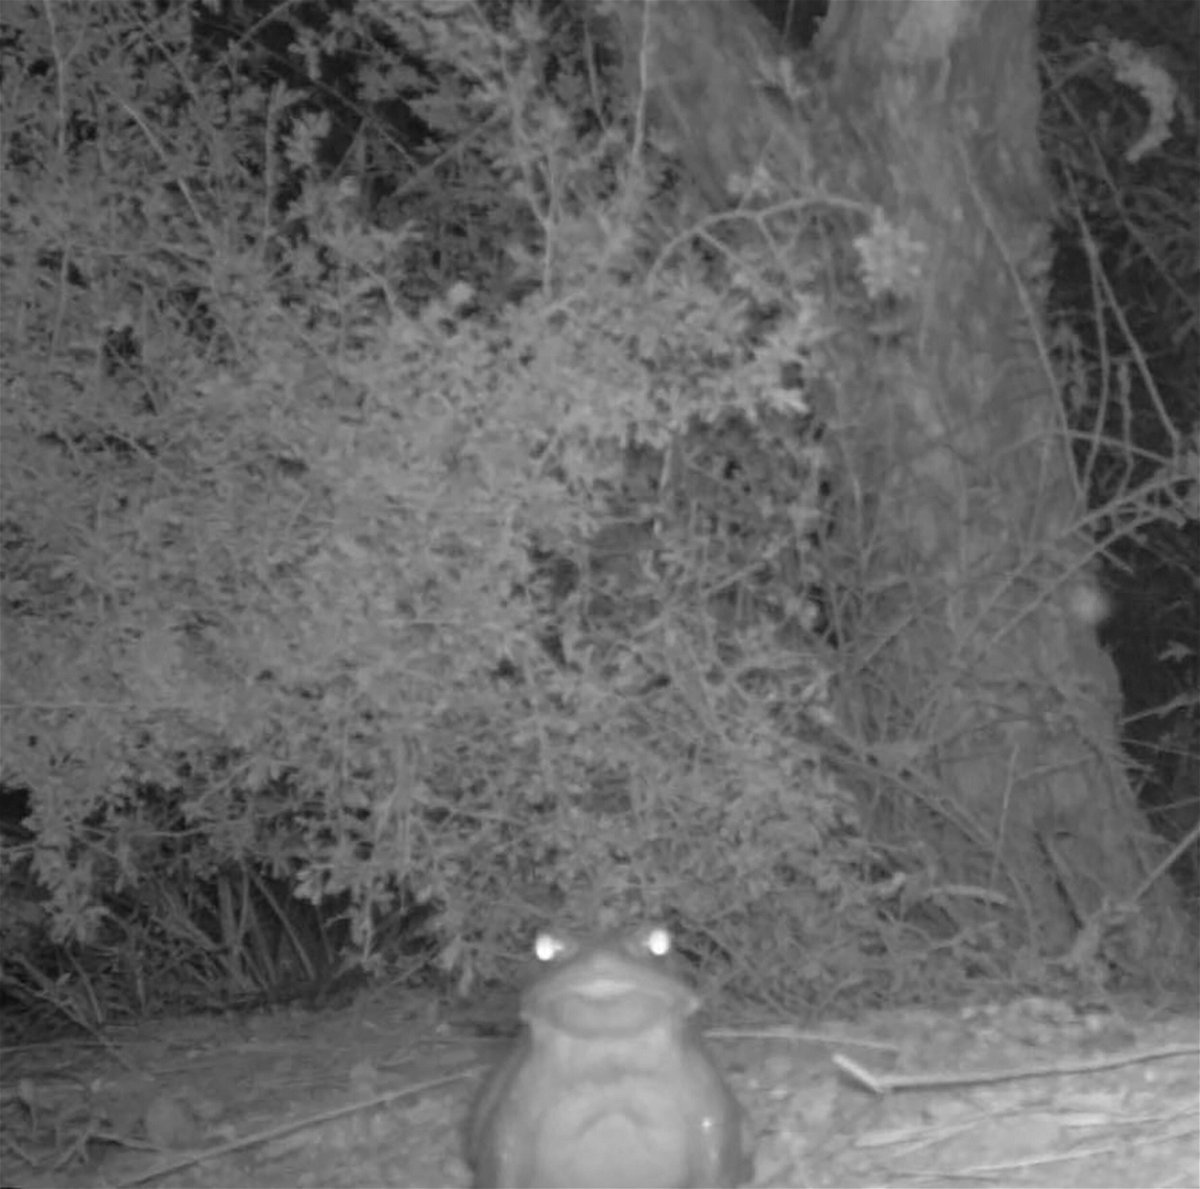 <i>National Park Service</i><br/>Black and white motion sensor camera capture of Sonoran desert toad at Organ Pipe Cactus National Monument